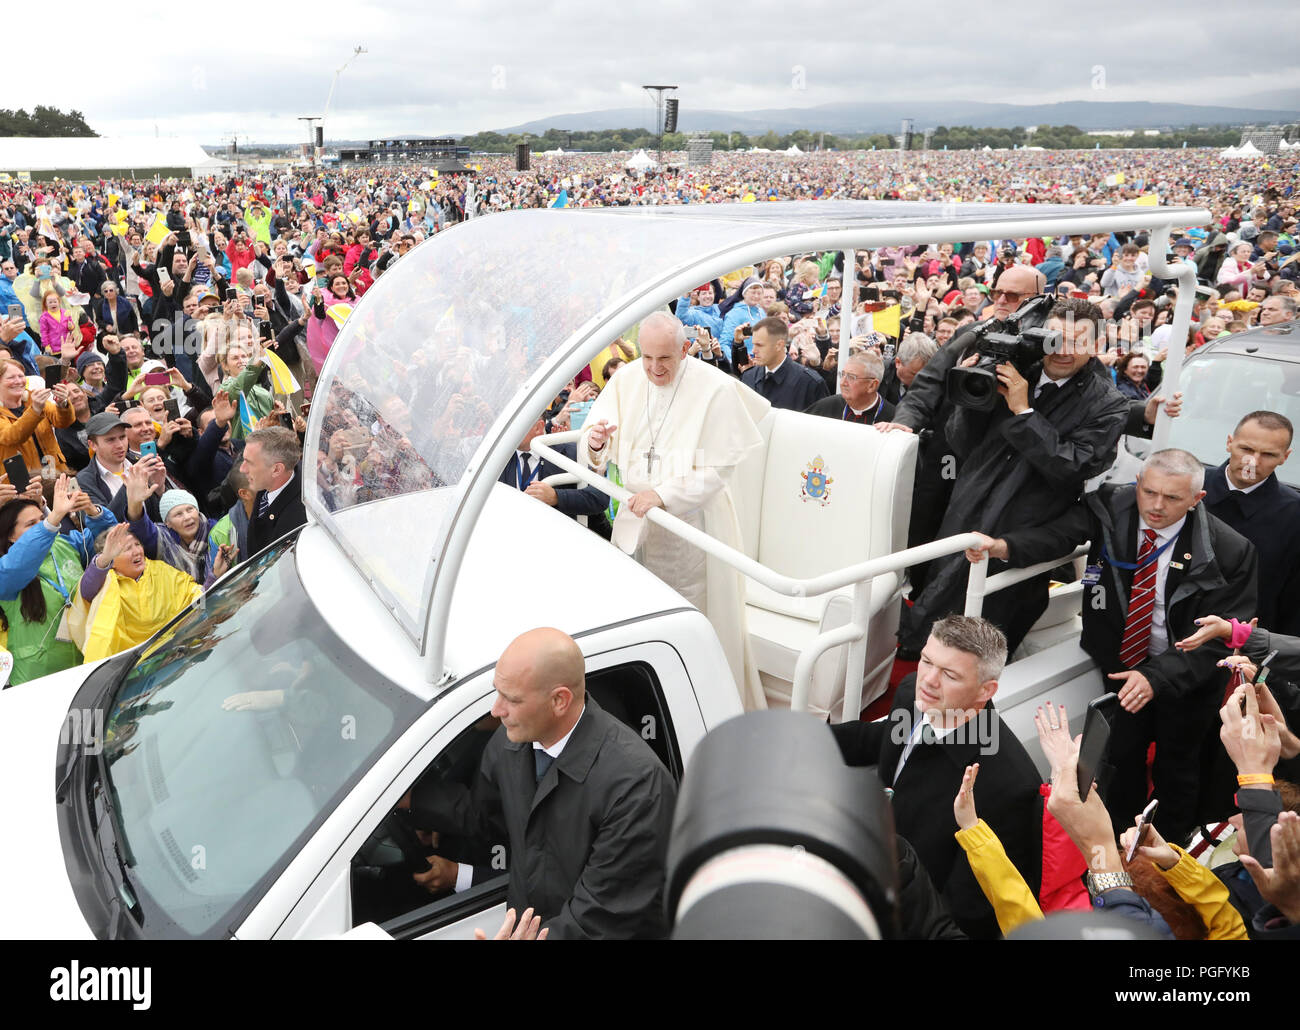 26/08/2018 Visit of Pope Francis to Ireland. People from all over the world cheer on Pope Francis as he arrives in the Phoenix Park in his Pope Mobile. Pilgrims came prepared for the wet weather ahead of the Mass to be given by Pope Francis later today, during day two of his visit to Ireland. His visit comes soon after the most recent clerical abuse controversy to rock the Church, as a report claimed that over 300 priests who abused more than 1,000 children in Pennsylvania were protected by the Church - in addition to recent Irish scandals, including reports into the Magdalene Laundries and th Stock Photo